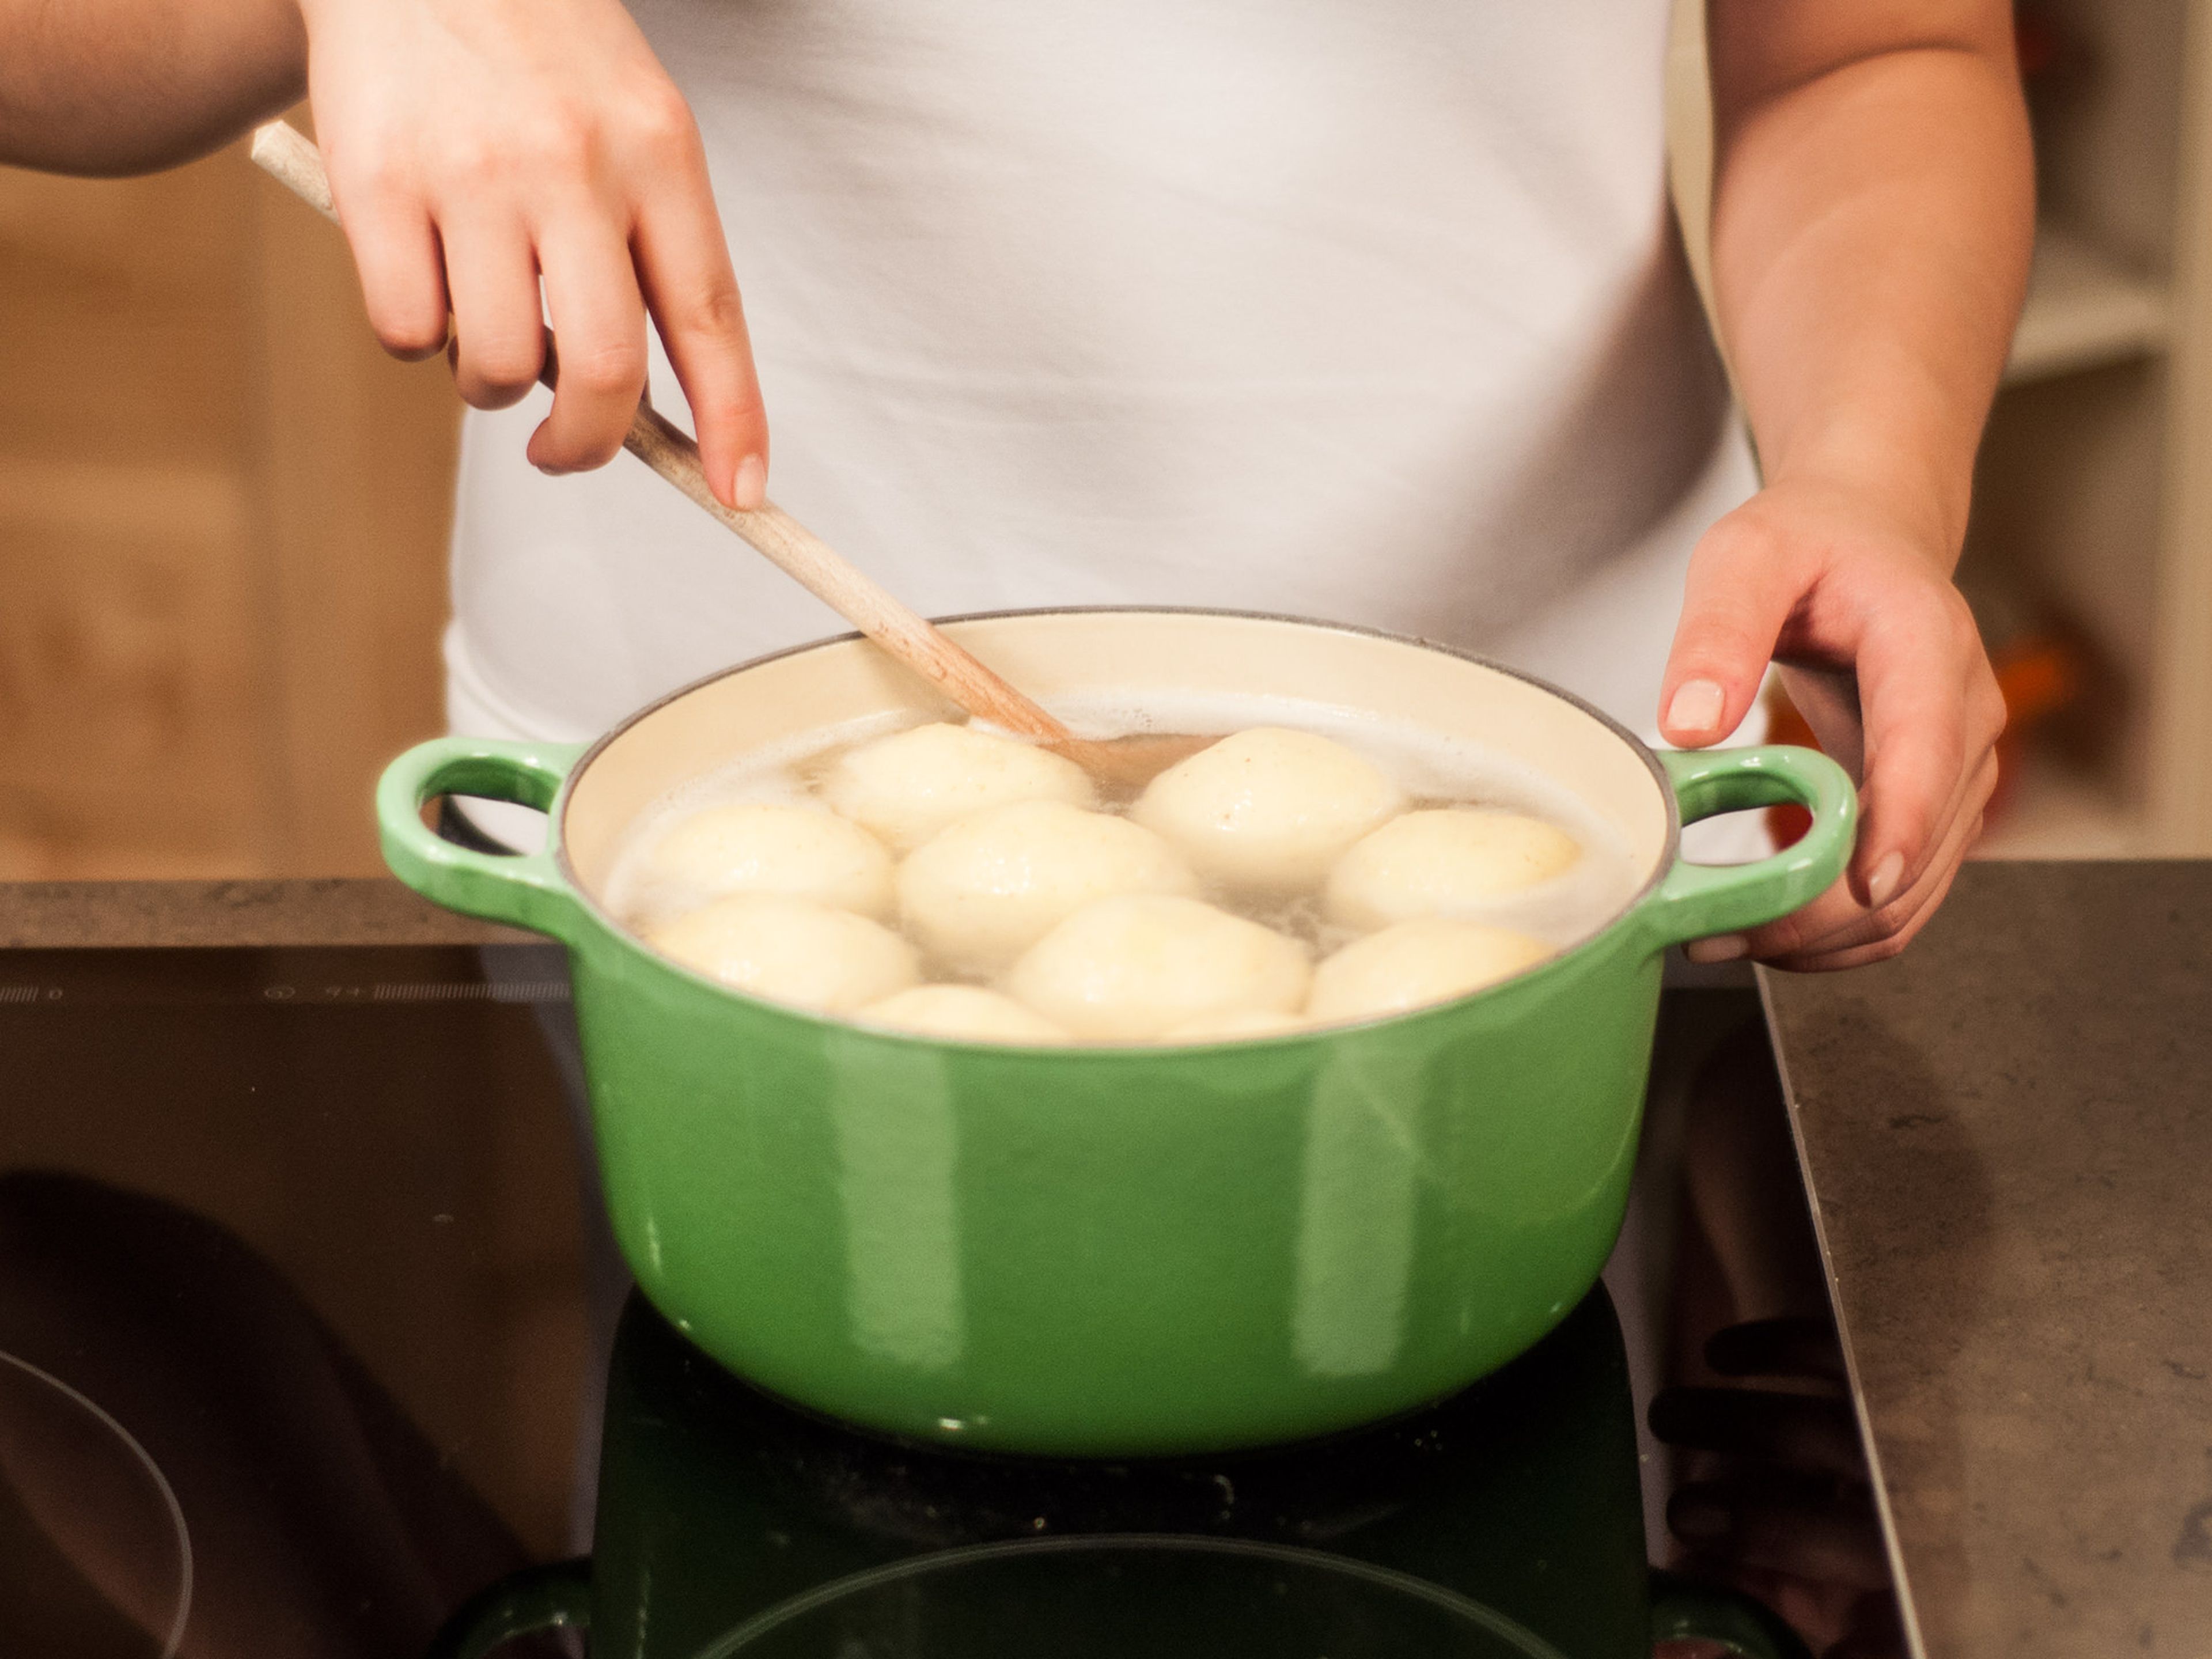 Bring a large pot of lightly salted water to a boil. Carefully drop dumplings into water and reduce heat. Allow to steep for approx. 20 – 30 min. until dumplings are floating. Then, carefully remove from water with a skimmer.